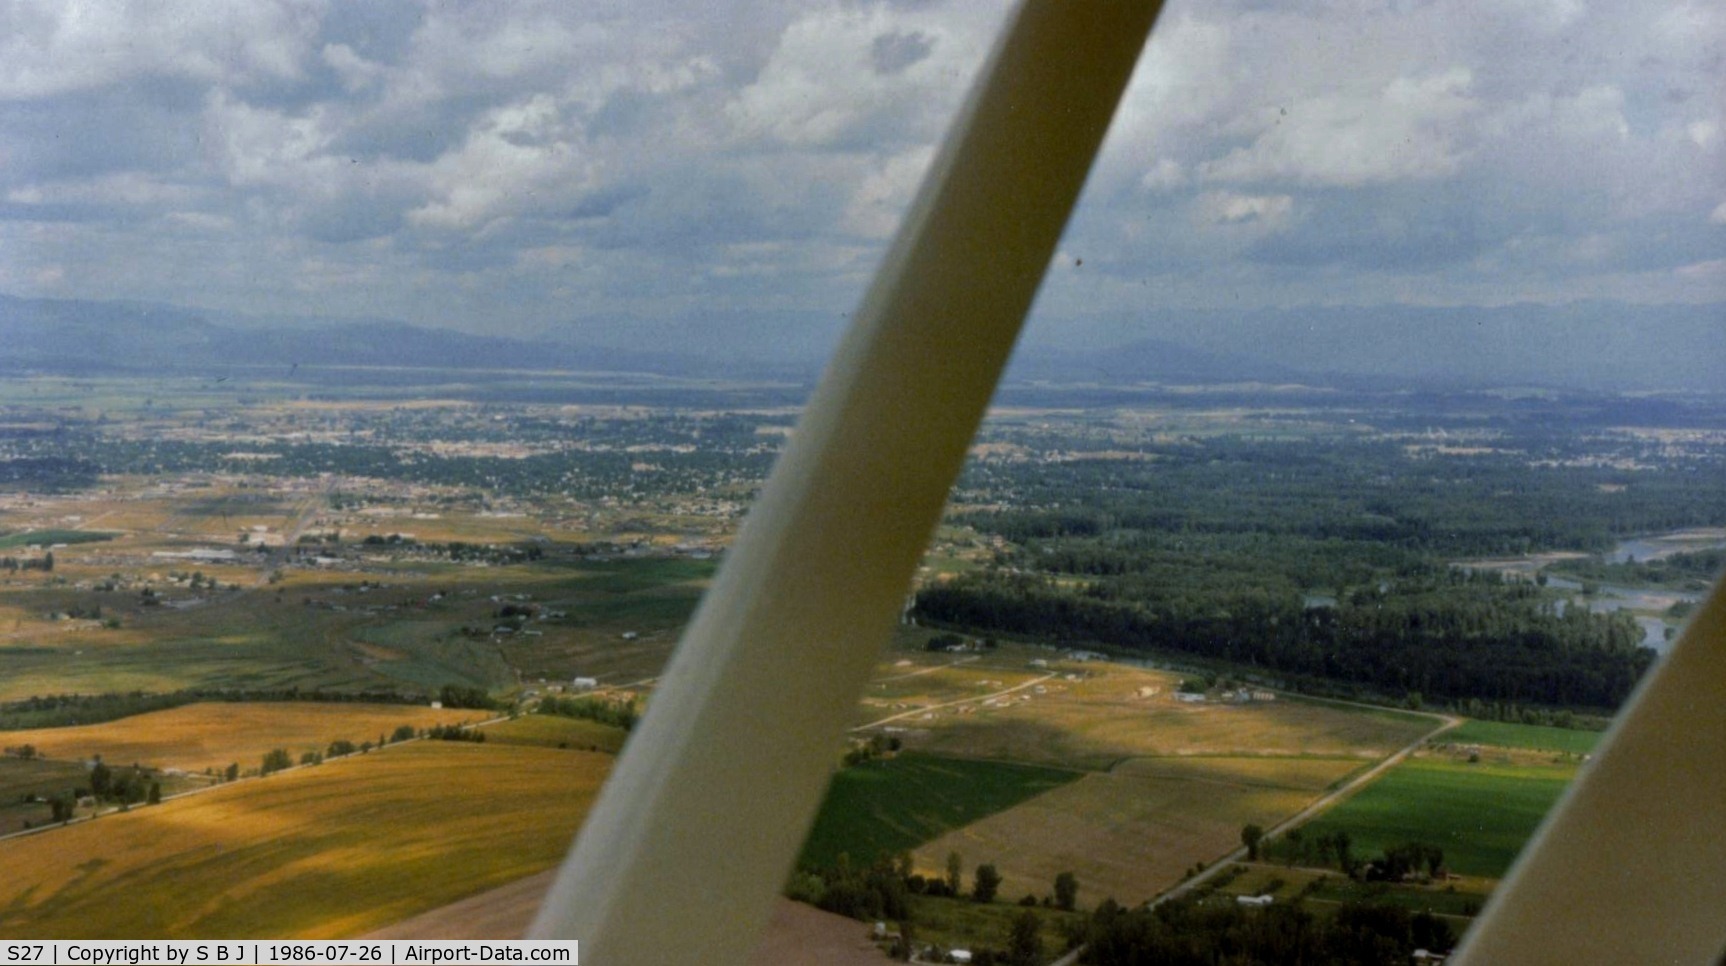 Kalispell City Airport (S27) - Kalispell airport is seen on the far left and middle of picture.The Flathead River is on the right and with the view to the north and not far from Glacier Park Intl. airport..